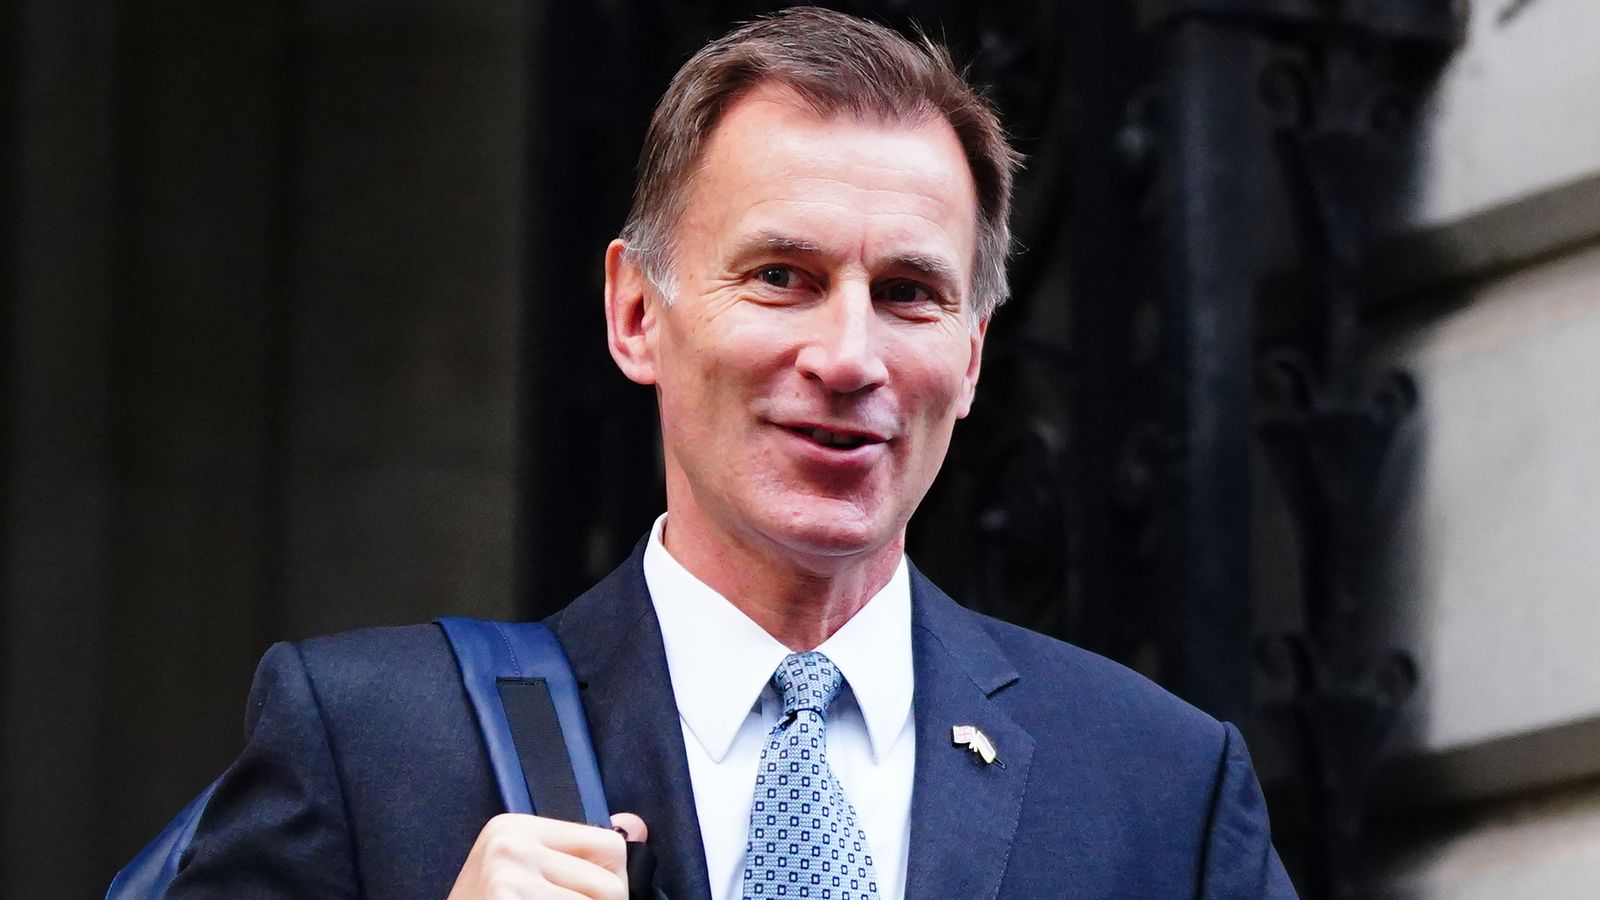 Spring budget: Chancellor Jeremy Hunt to announce 12 new investment zones to 'supercharge' hi-tech growth